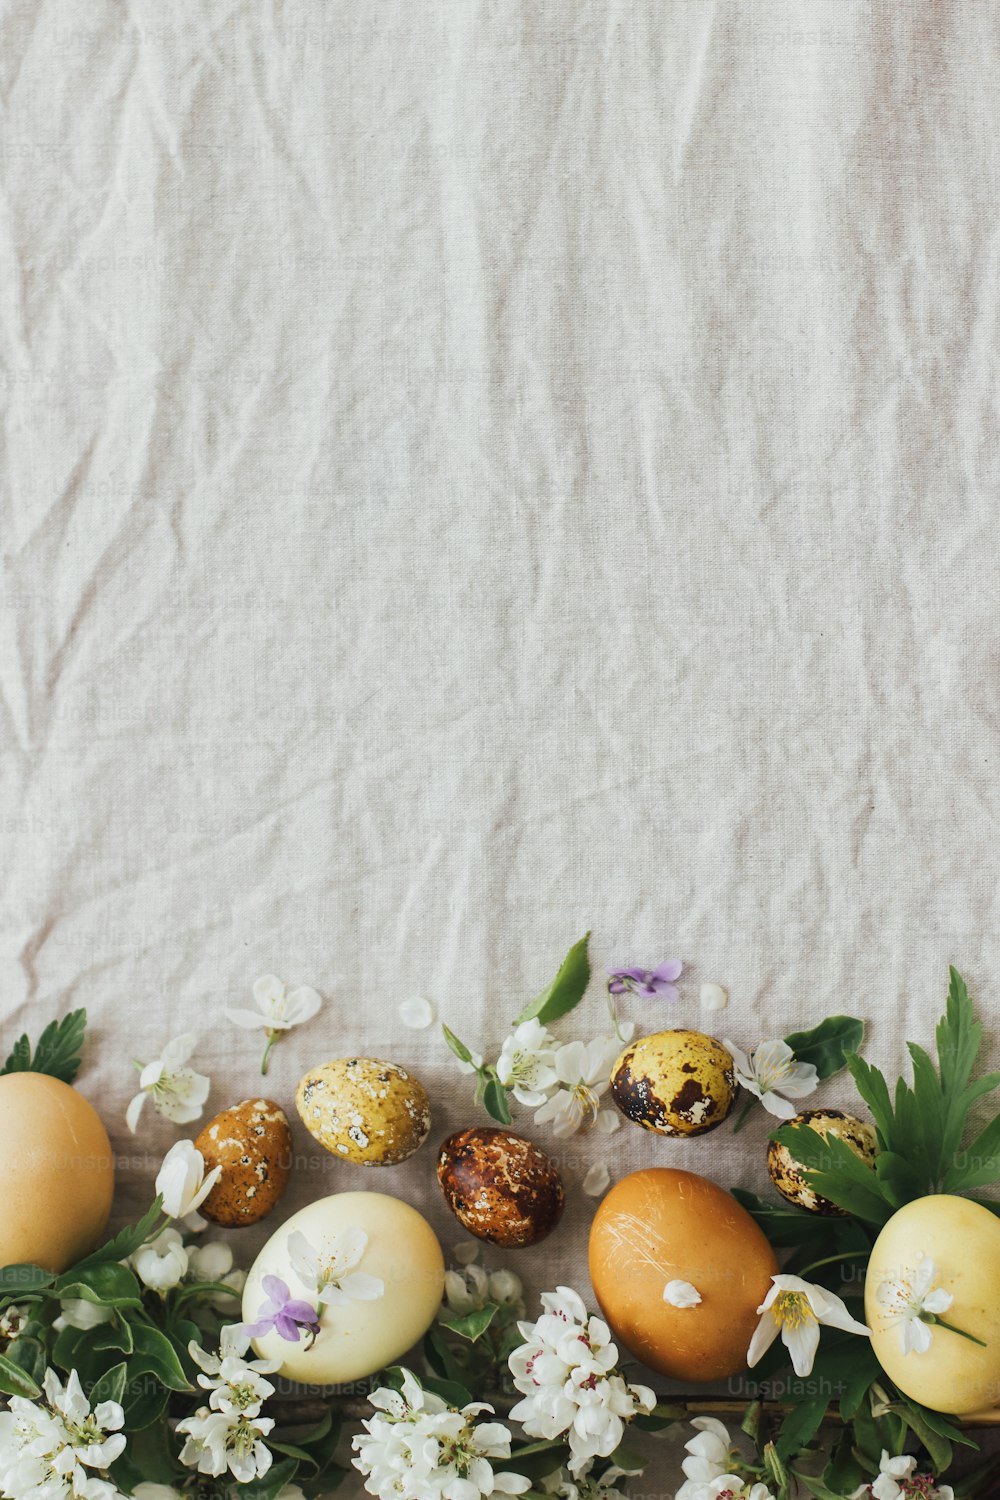 Easter eggs with spring flowers on rustic linen background, flat lay with space for text. Stylish modern easter and quail eggs with natural dye and spring blooms. Aesthetic seasons greeting card